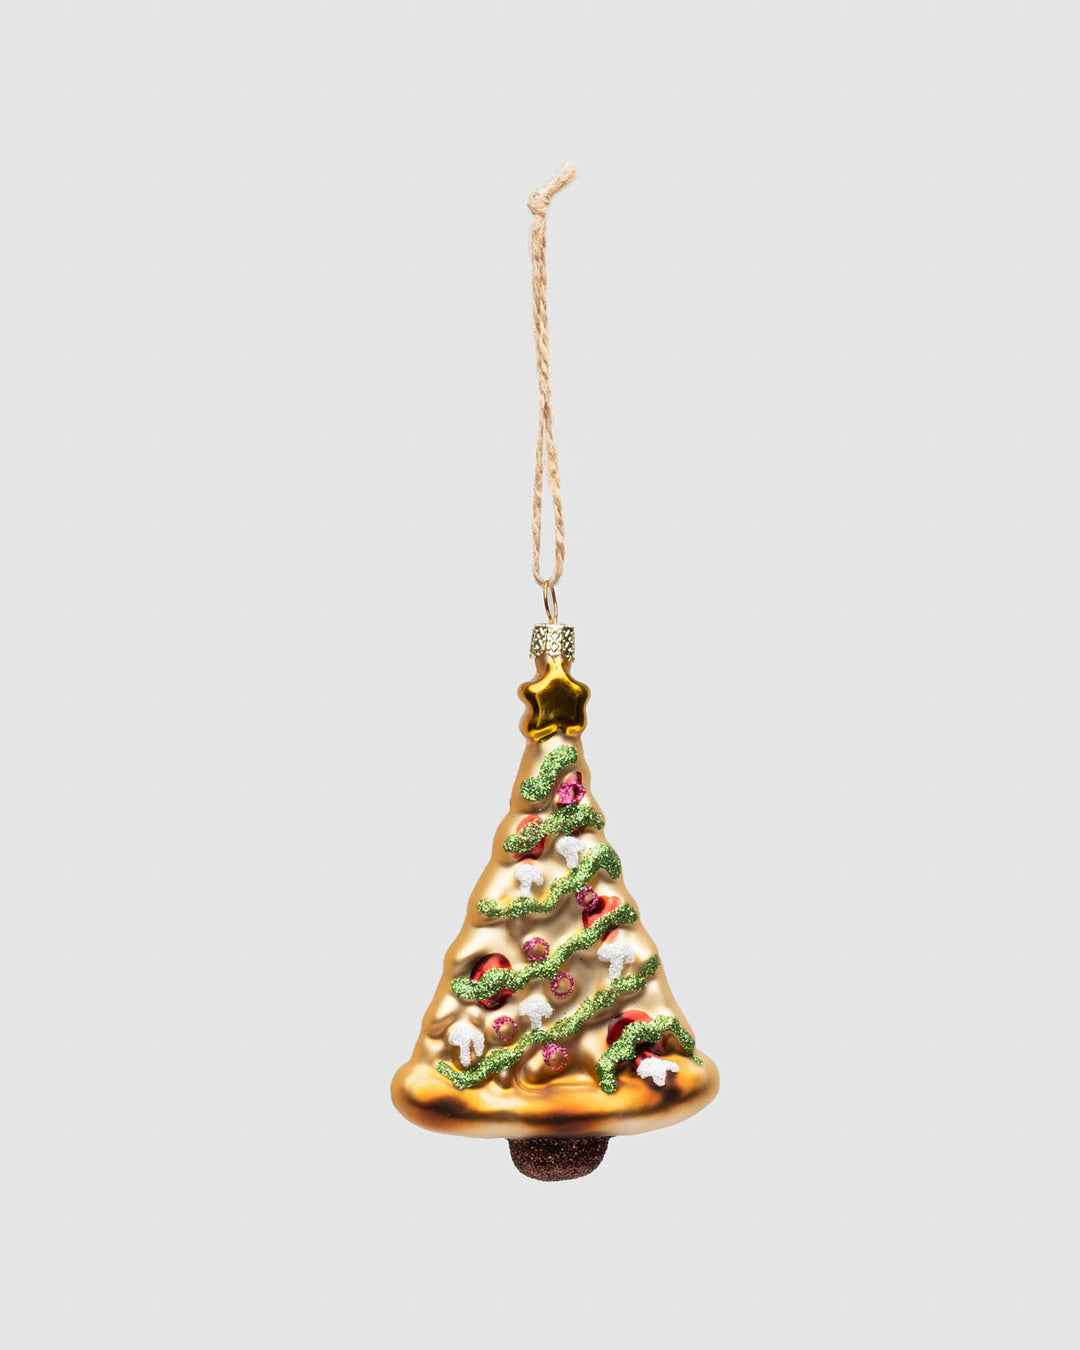 Pizza Tree Ornament - Main Image Number 1 of 1